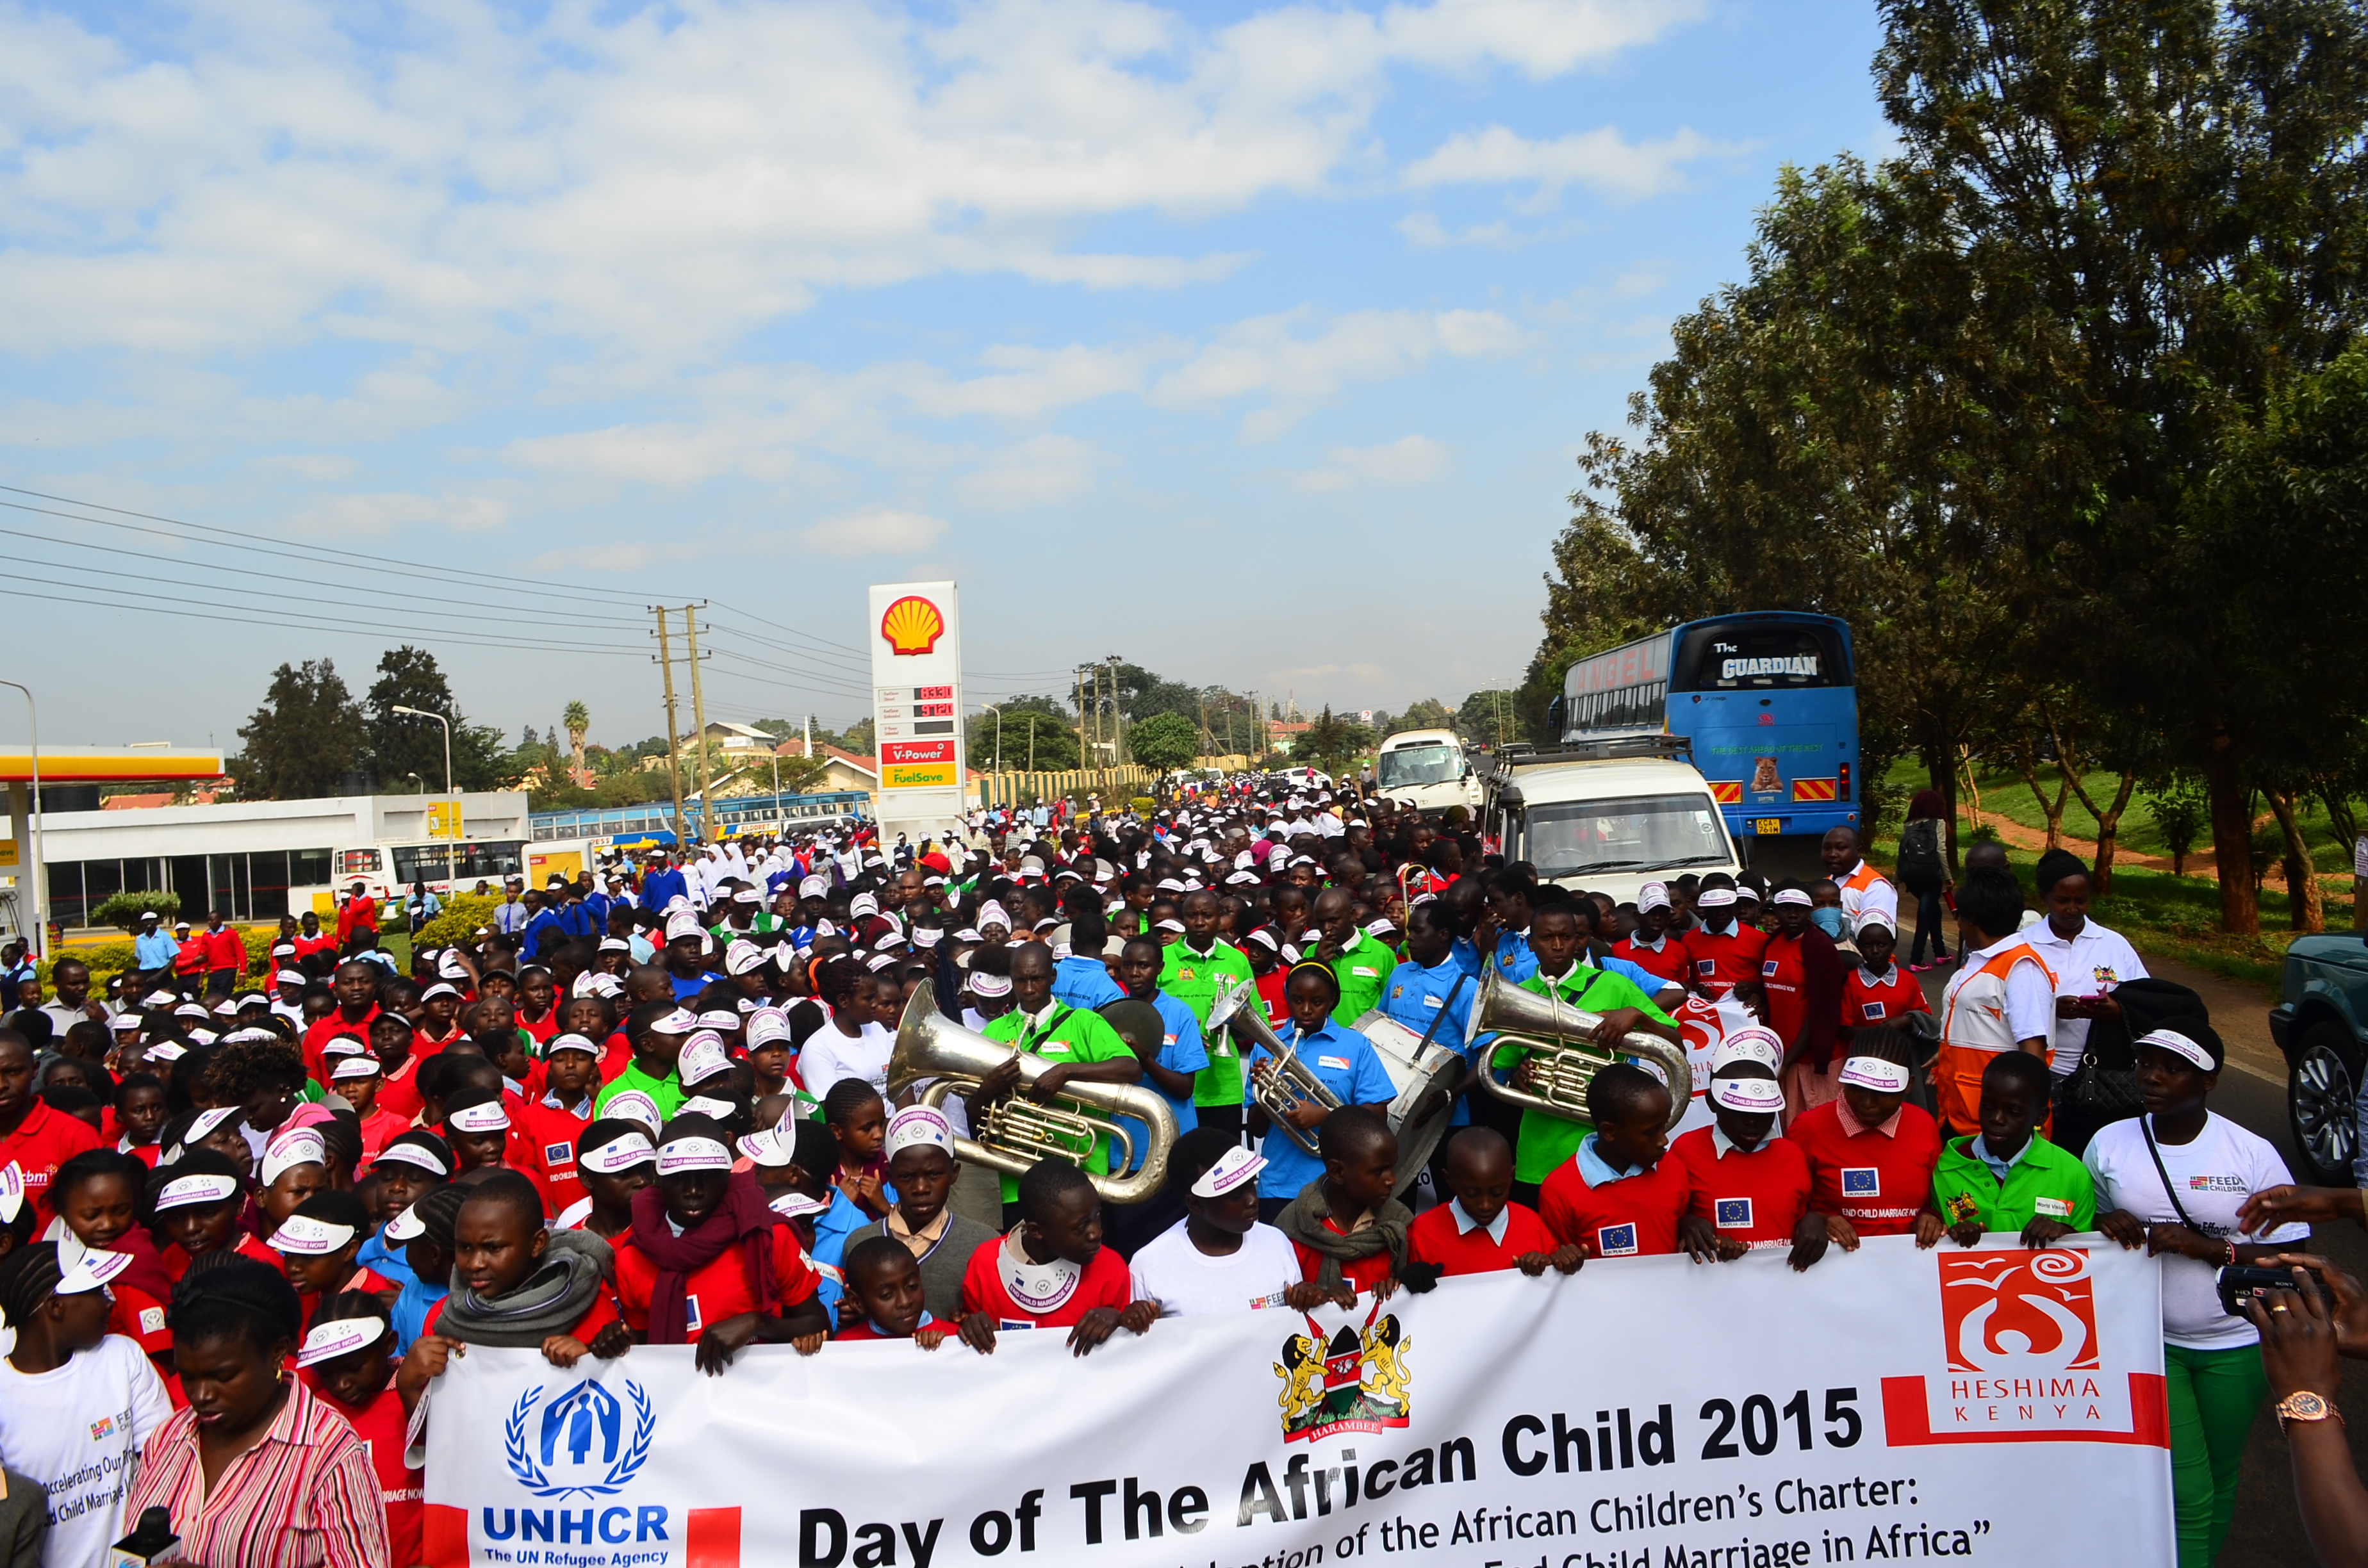 Day of the African Child 2015